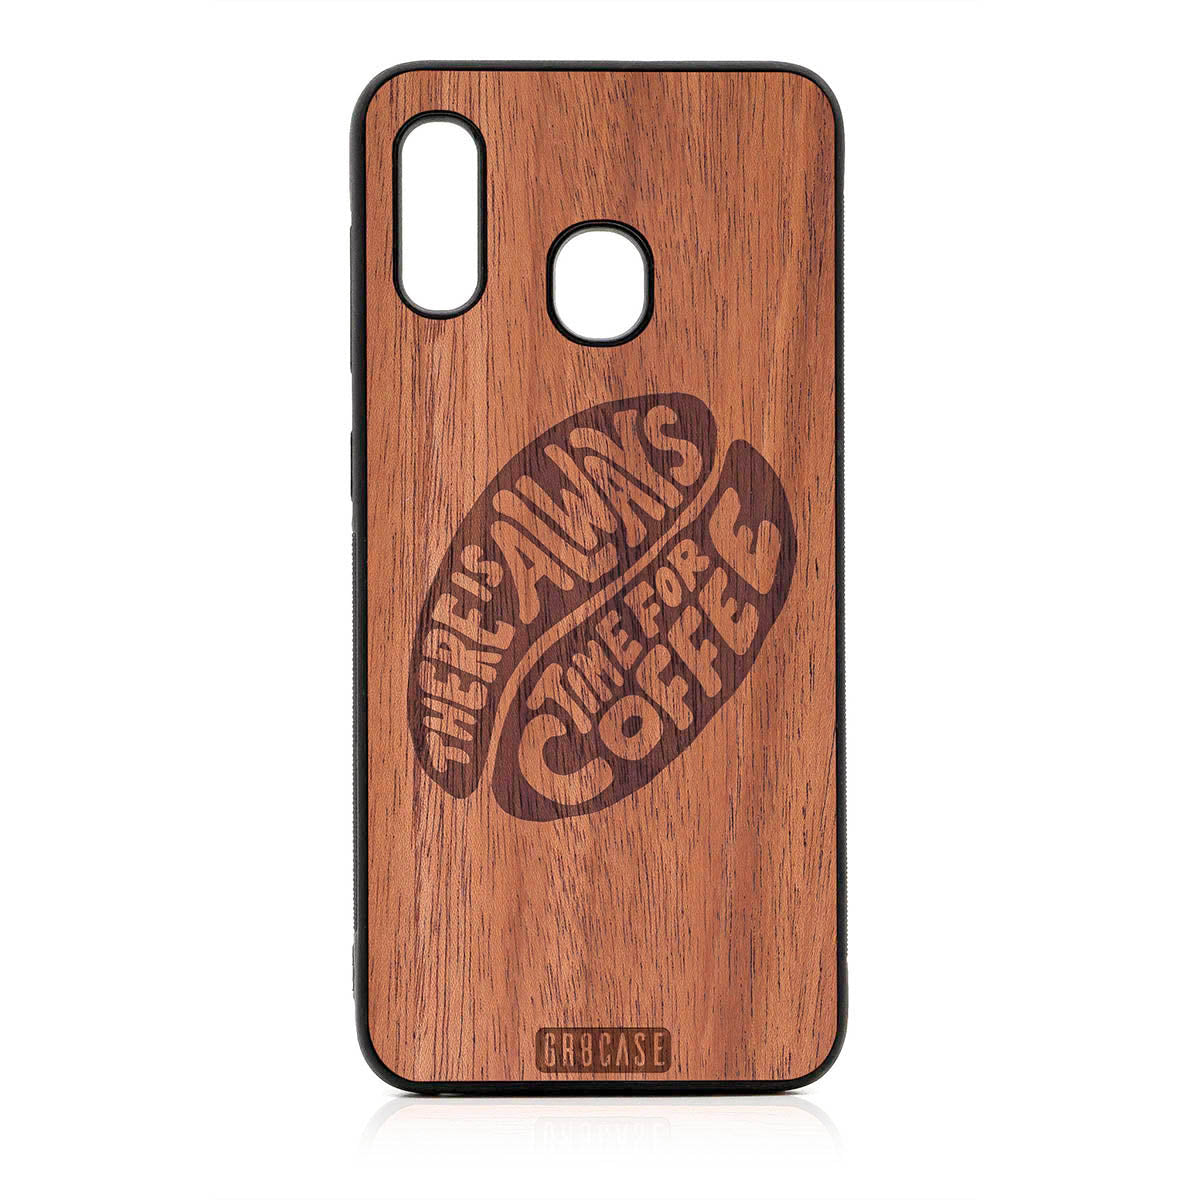 There Is Always Time For Coffee Design Wood Case For Samsung Galaxy A20